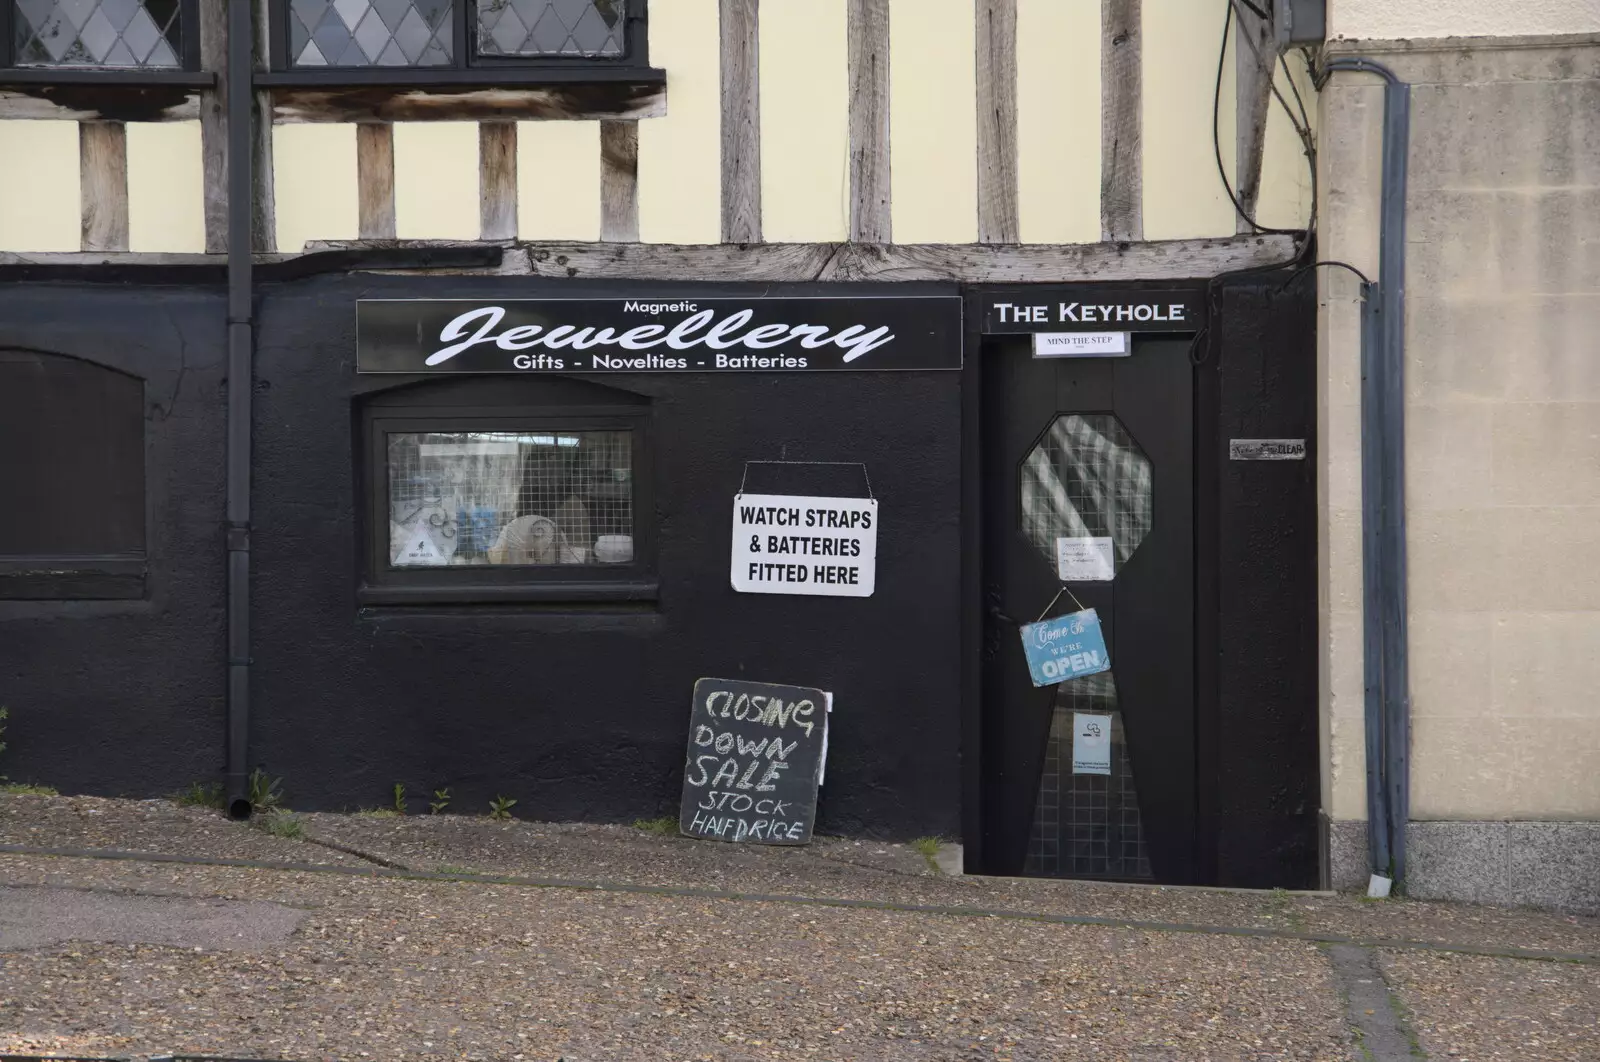 The Keyhole jewellery place is closing down, from The Lost Pubs of Diss, Norfolk - 26th April 2023